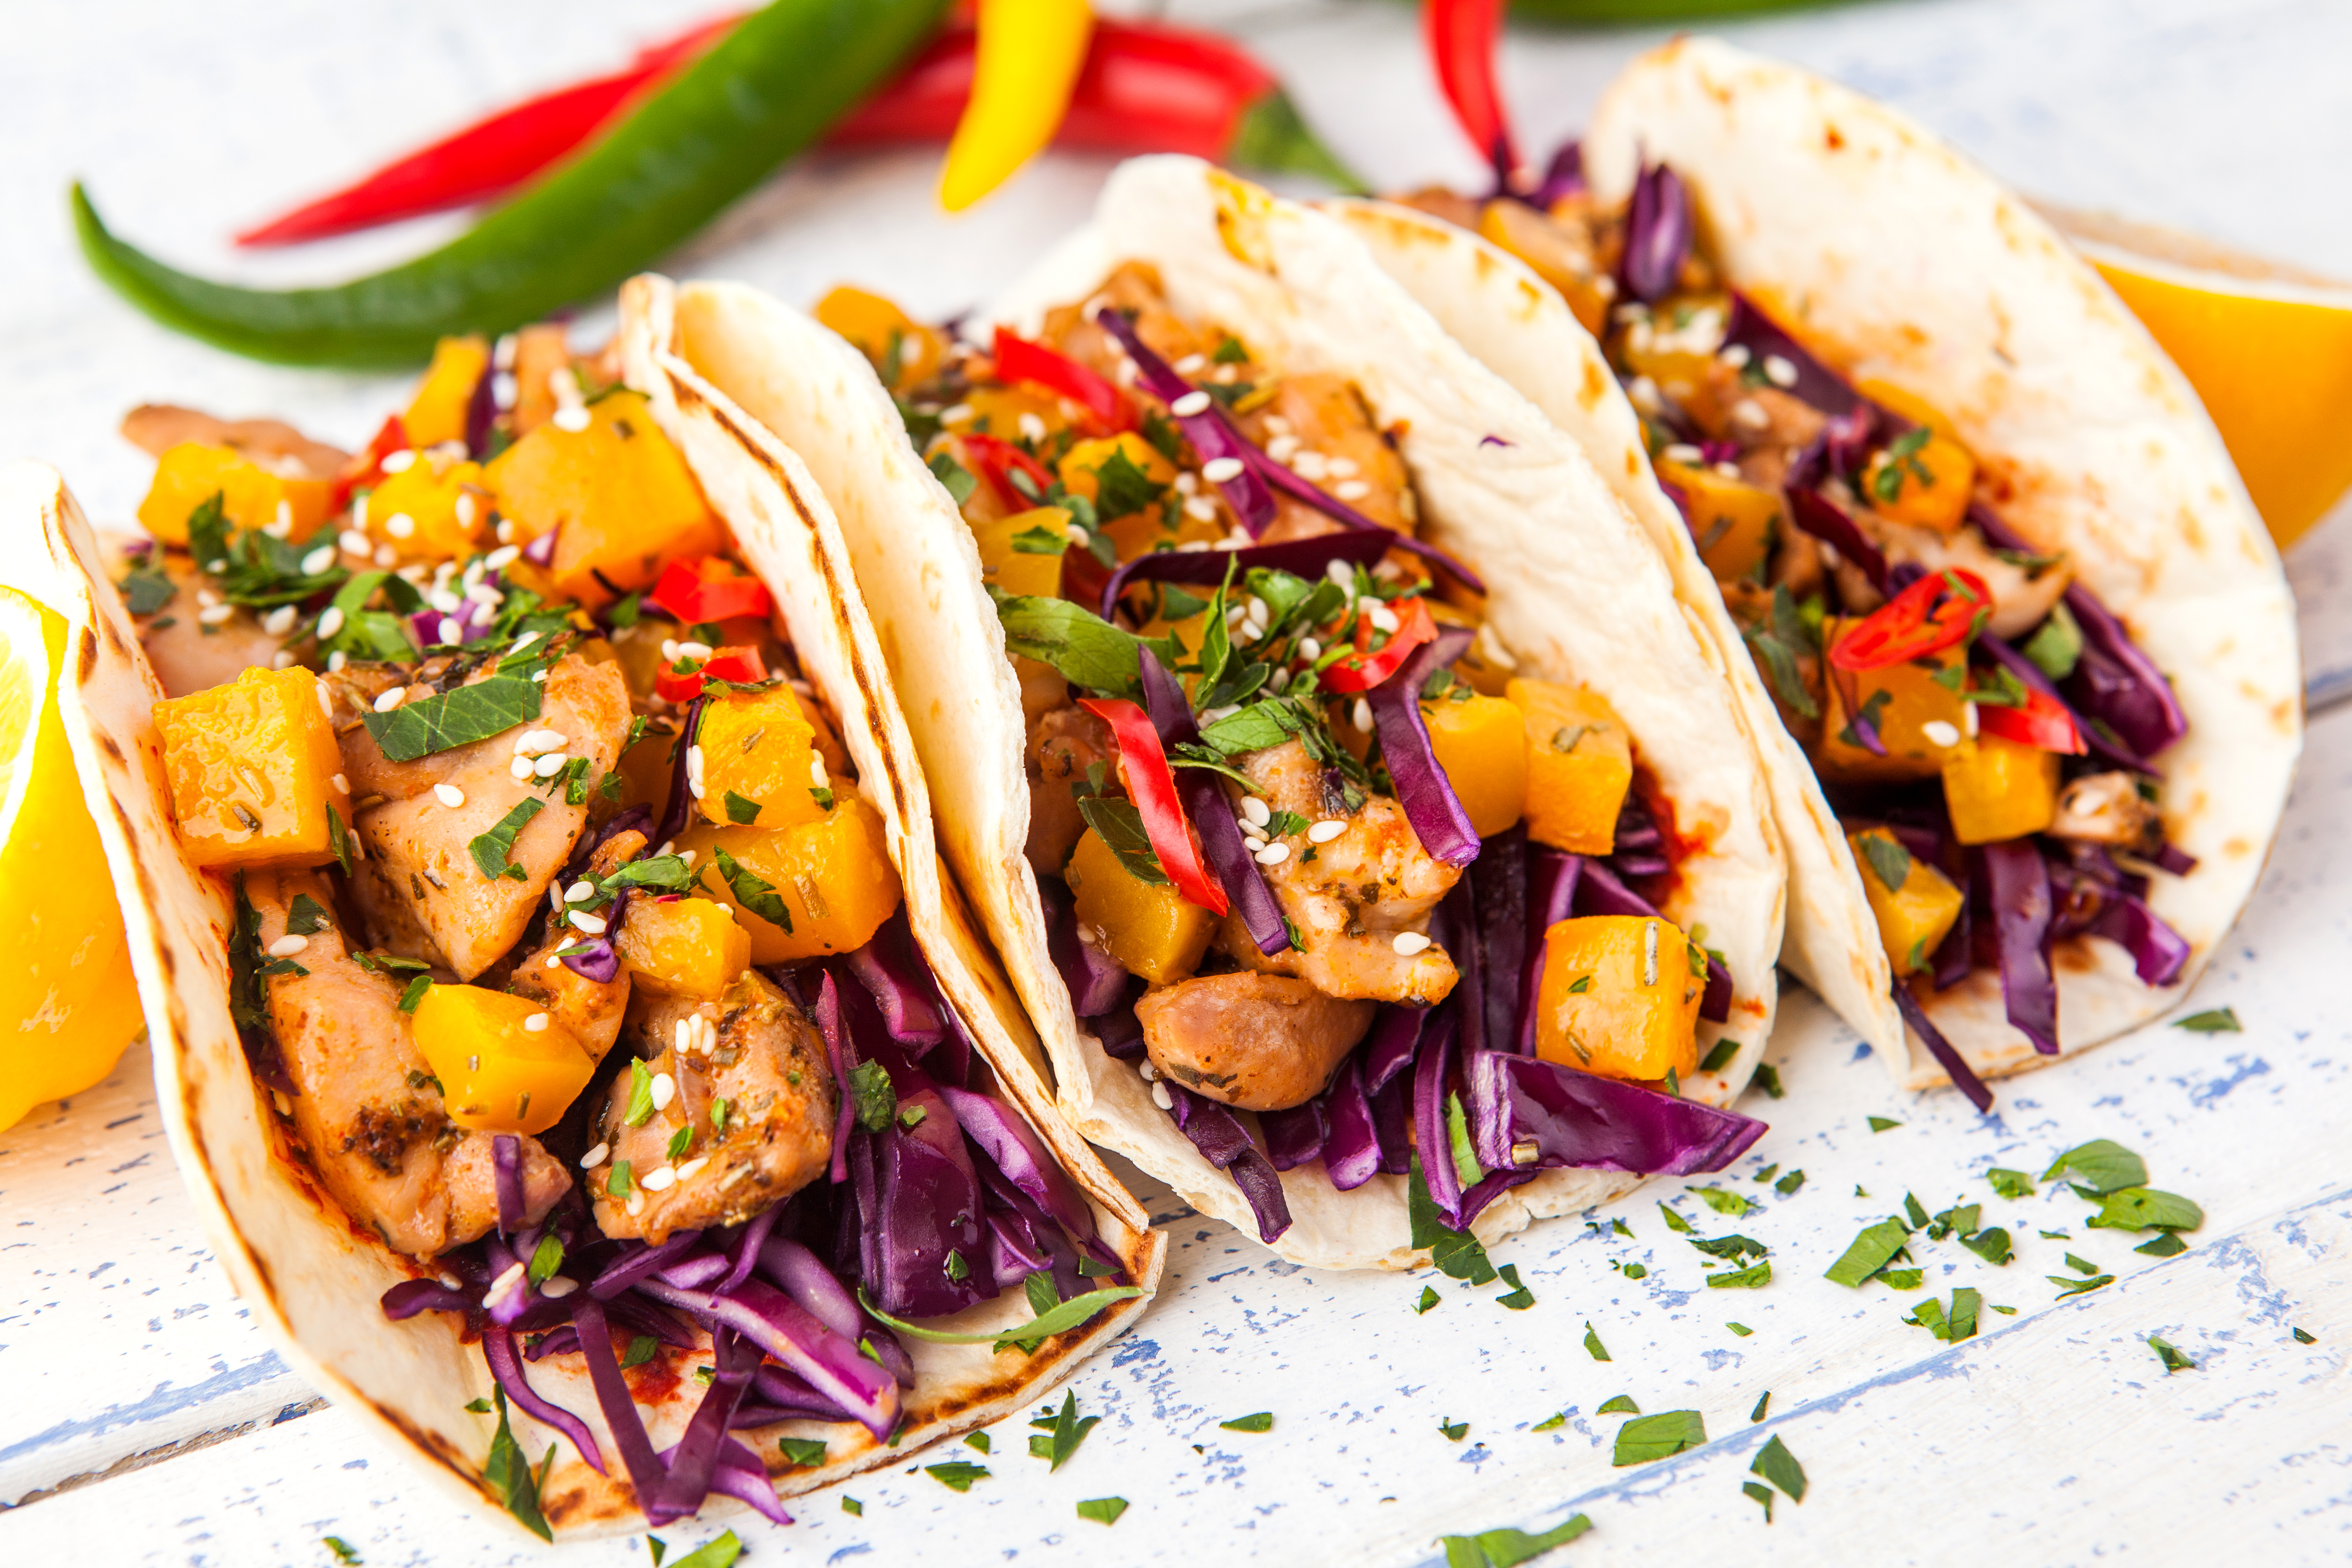 Mexican pork tacos with vegetables and pumpkin. Tacos on wooden white rustic background. Top view.